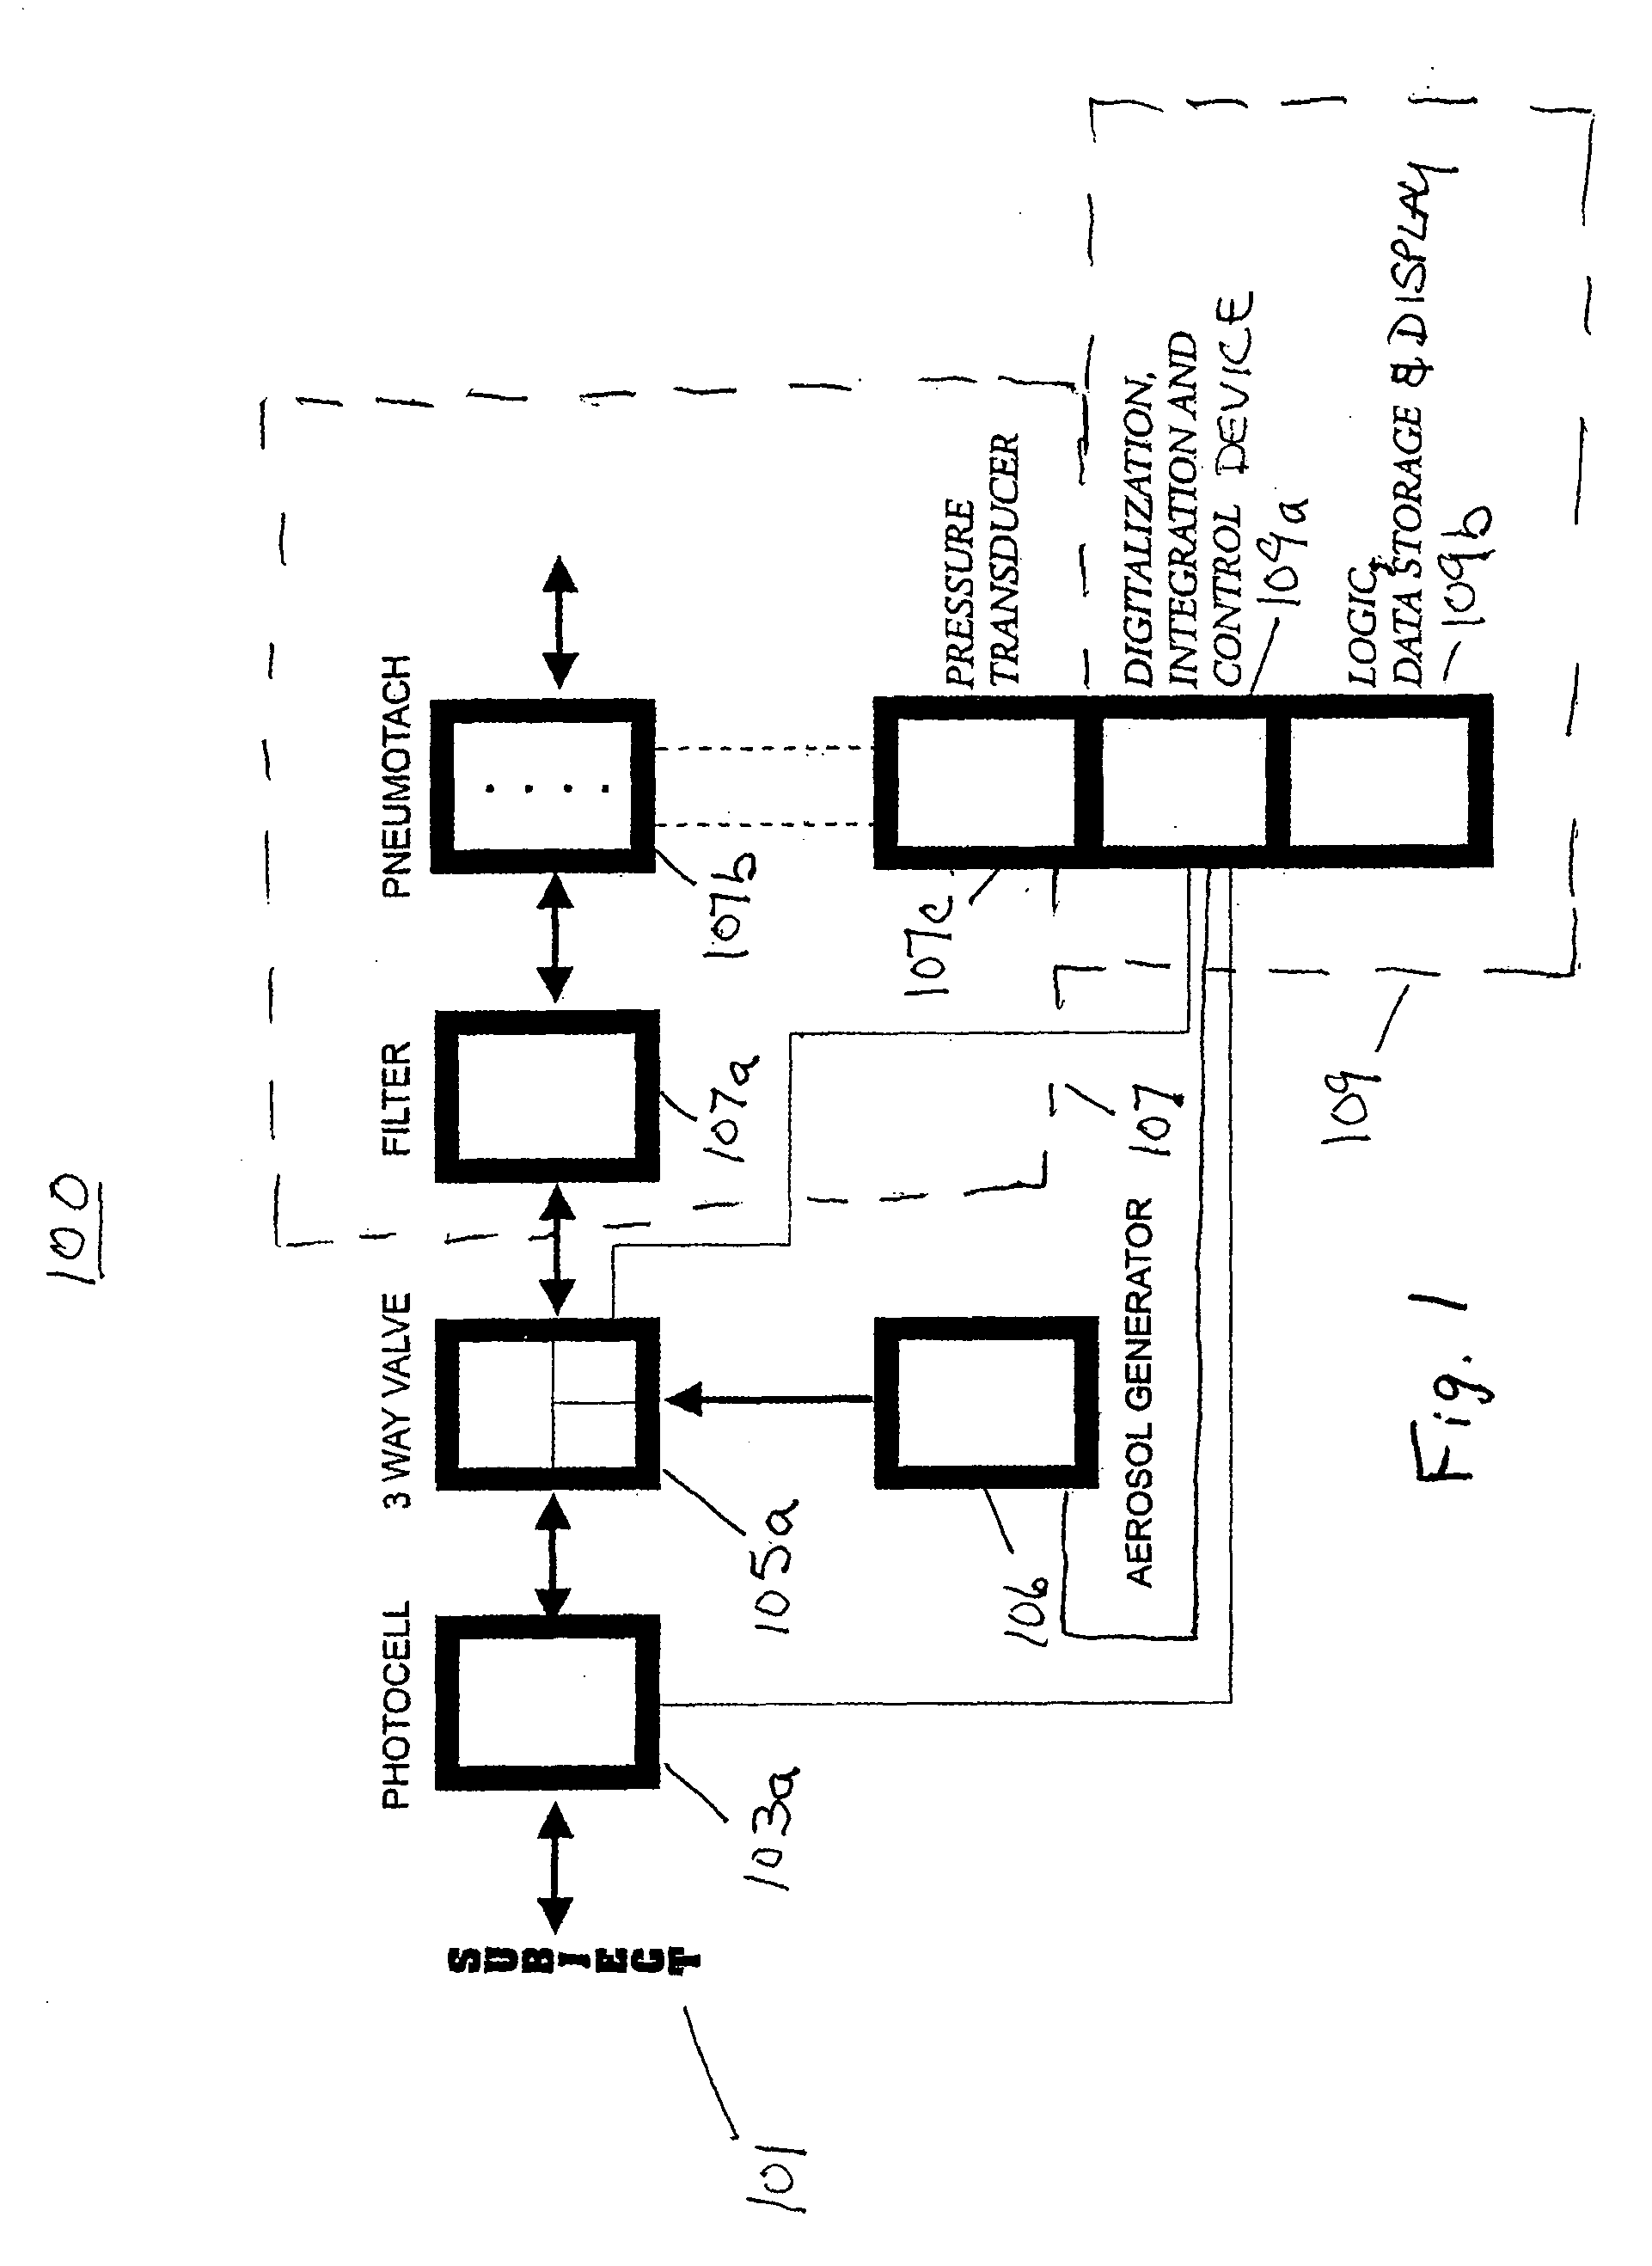 Apparatus and method for delivery of an aerosol